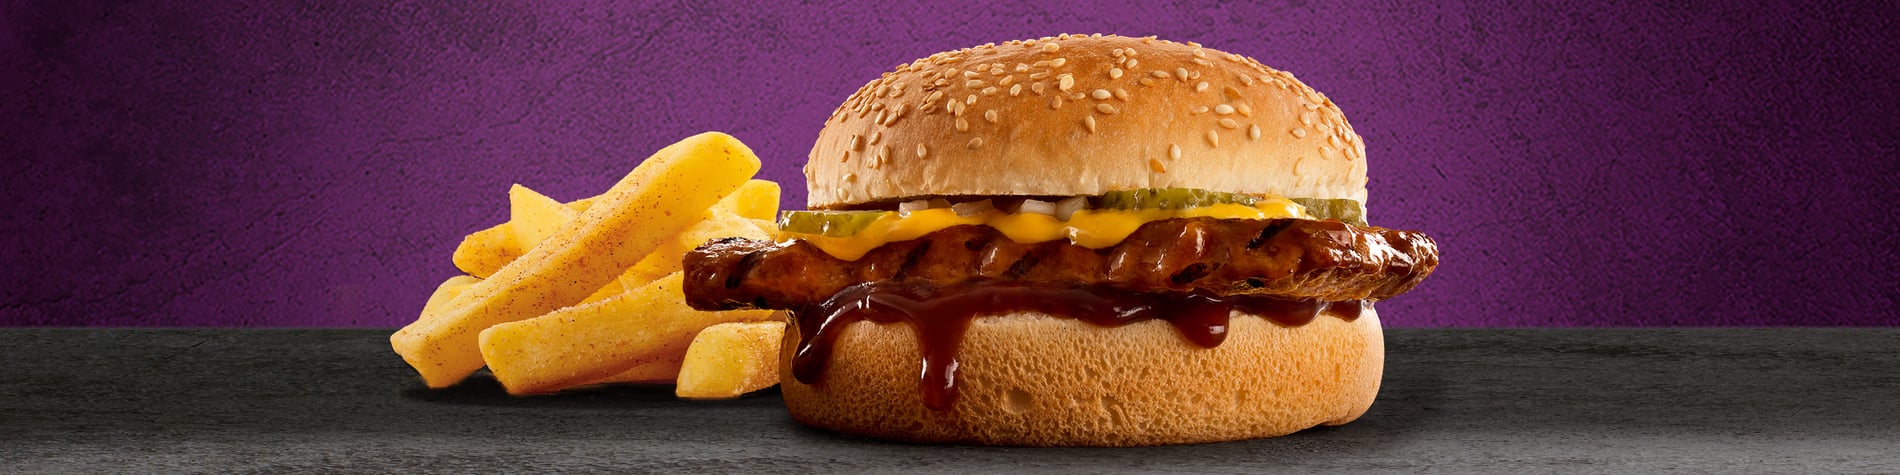 Flame-grilled Steers burger next to a full portion of chips against a purple background.